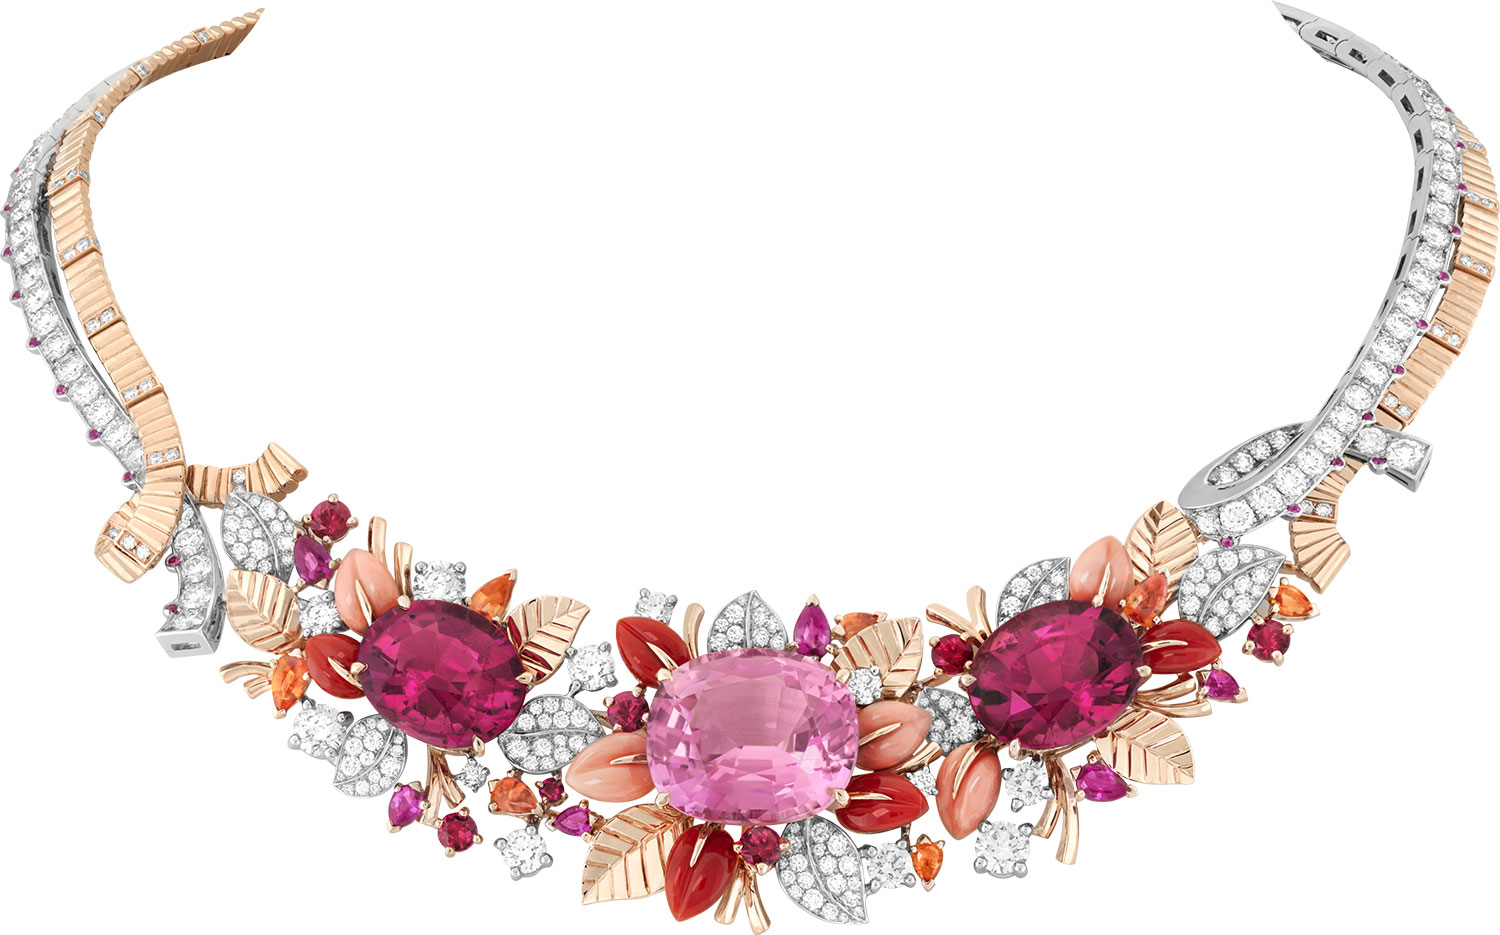 High Jewelry Collections - The New York Times